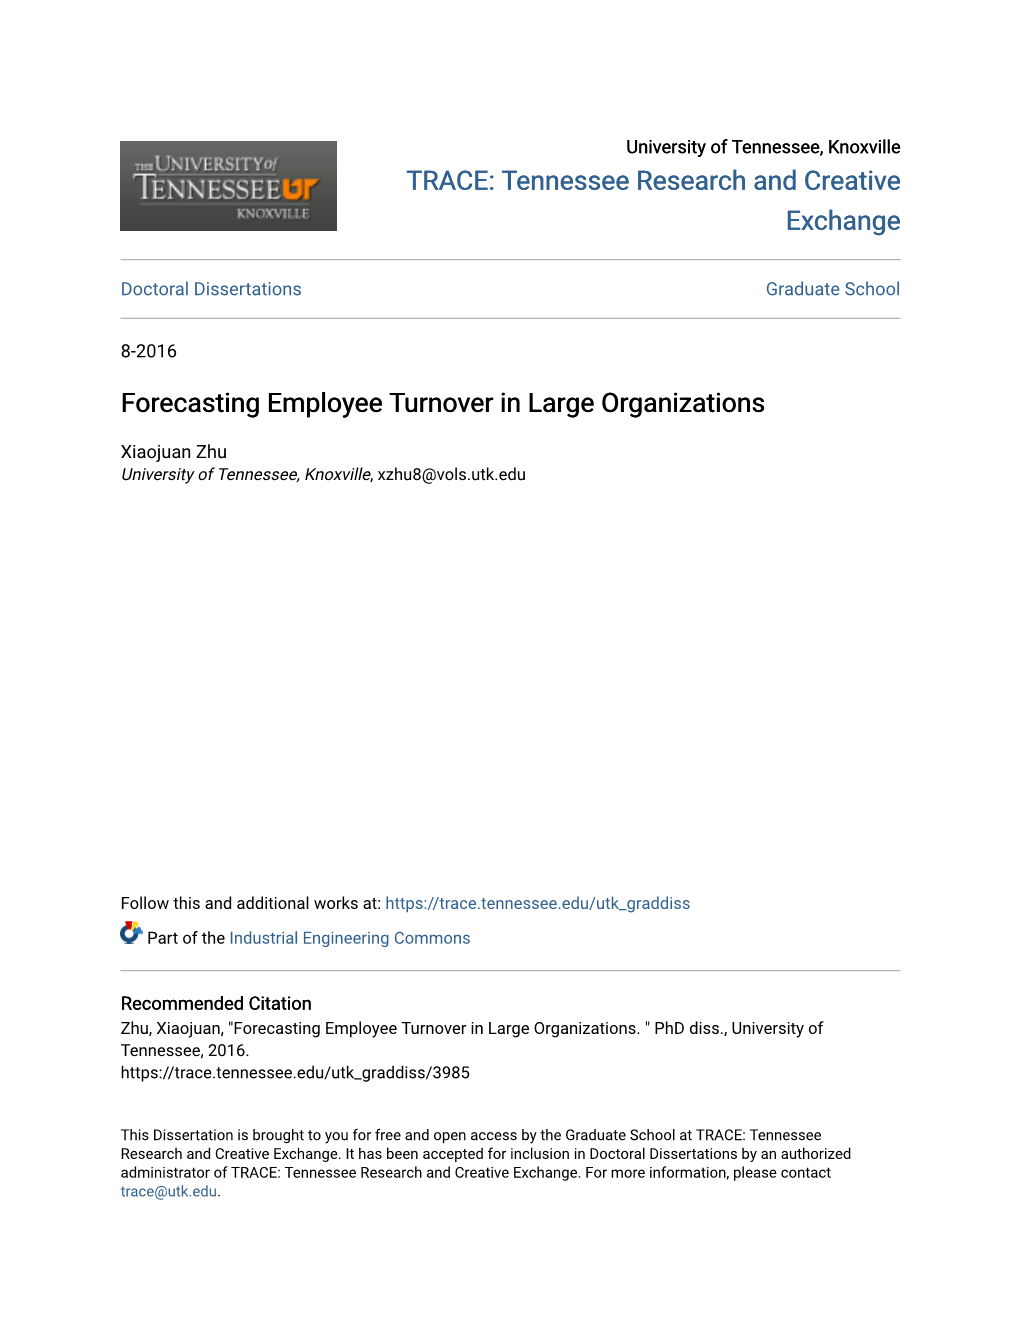 Forecasting Employee Turnover in Large Organizations